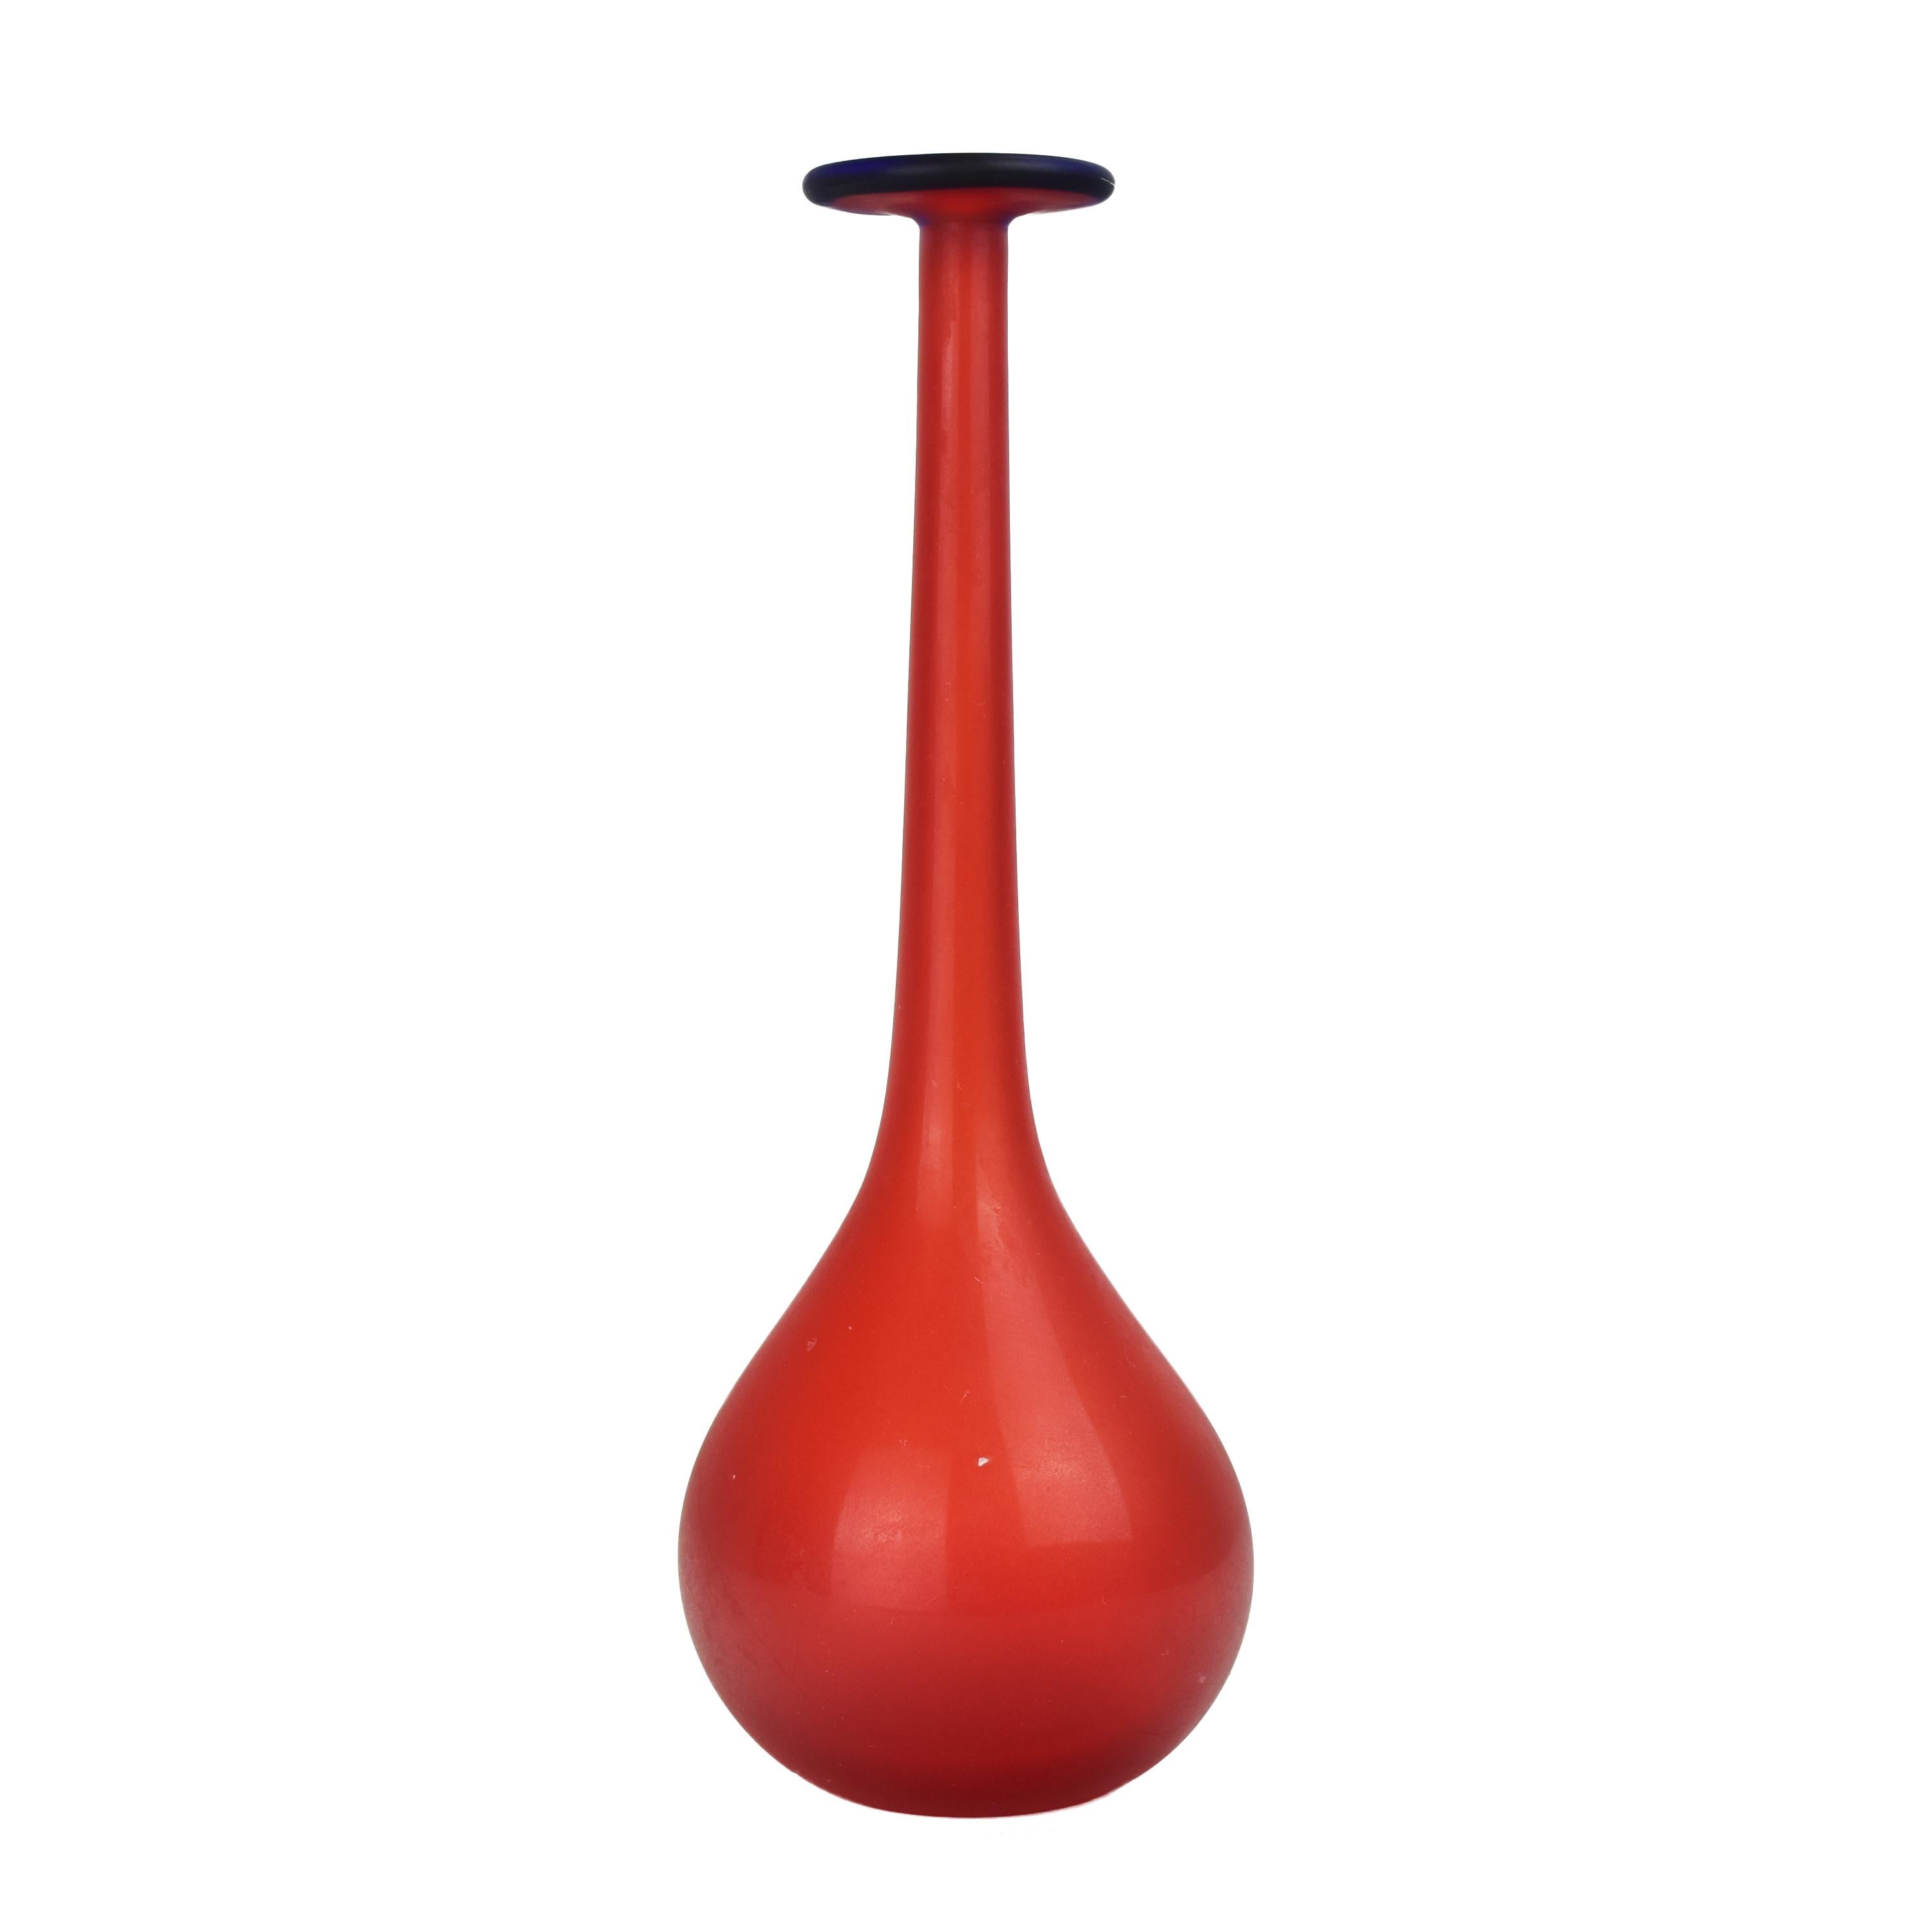 The vintage Carlo Moretti long stem soliflor vase is a striking and elegant piece of art glass that showcases the mastery of Italian glassmaker Carlo Moretti. This vase embodies the exquisite craftsmanship and artistic sensibility for which